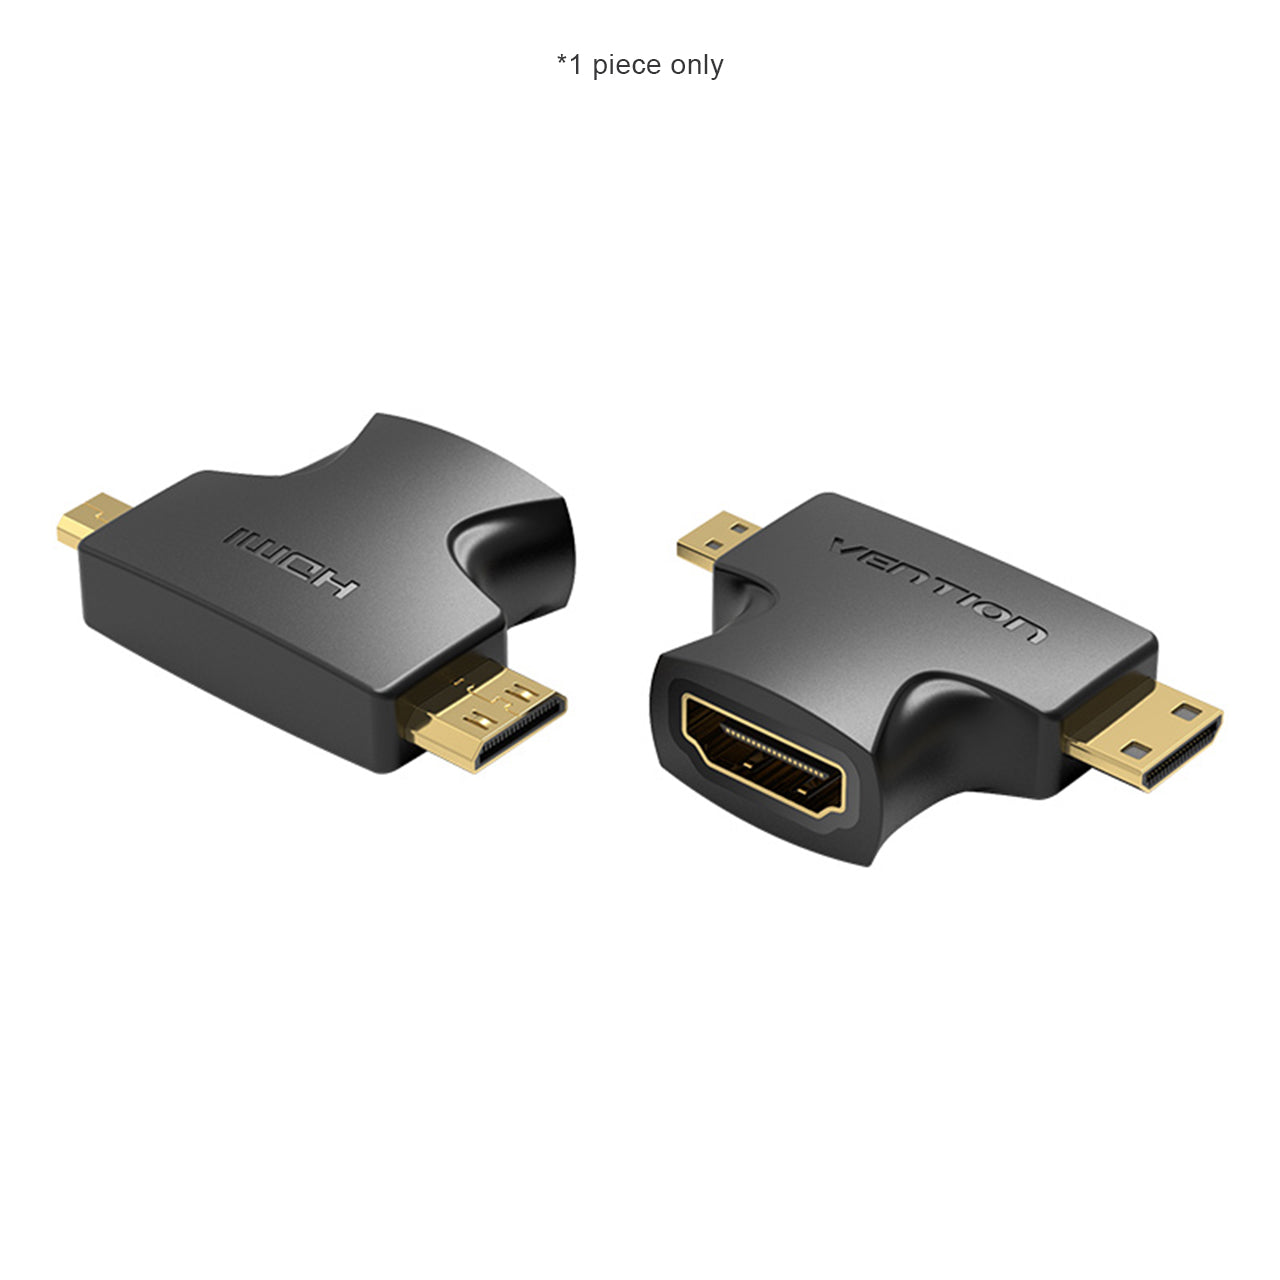 Vention 2 in 1 Mini / Micro HDMI Male to HDMI Female Adapter 1080p 60Hz Gold-Plated (AGFBO)